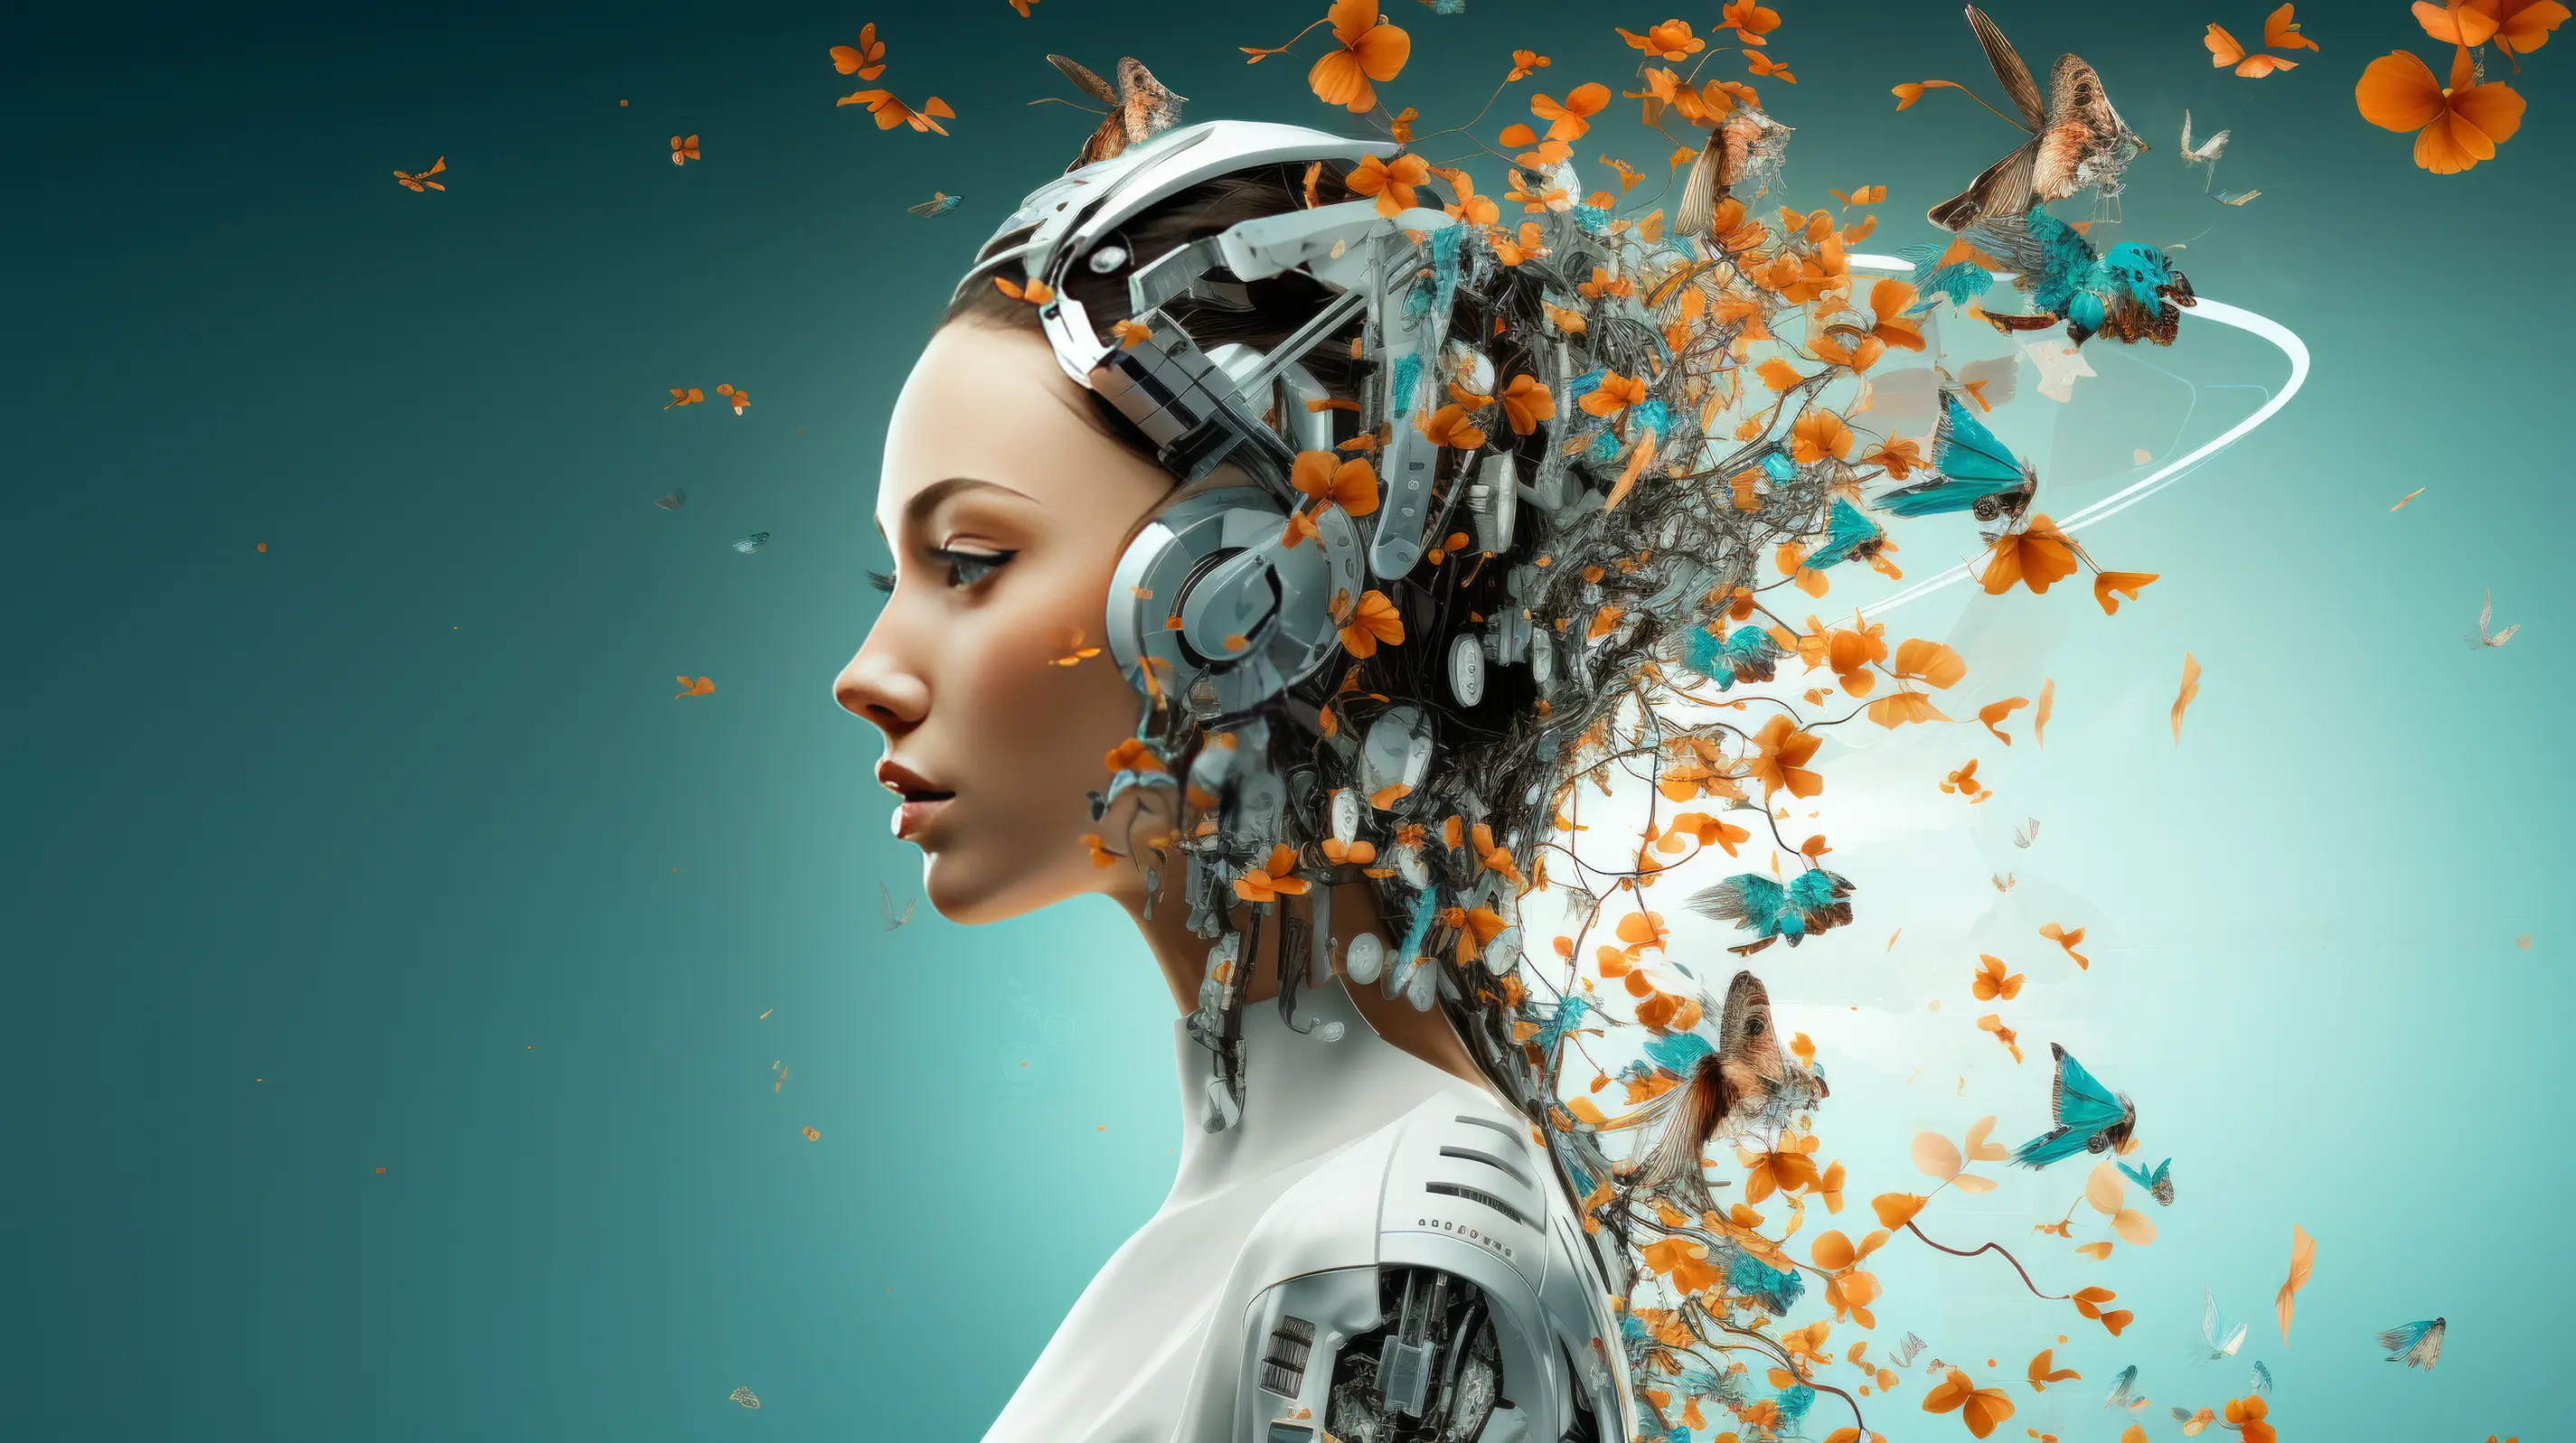 A robotic woman with butterflies and flowers